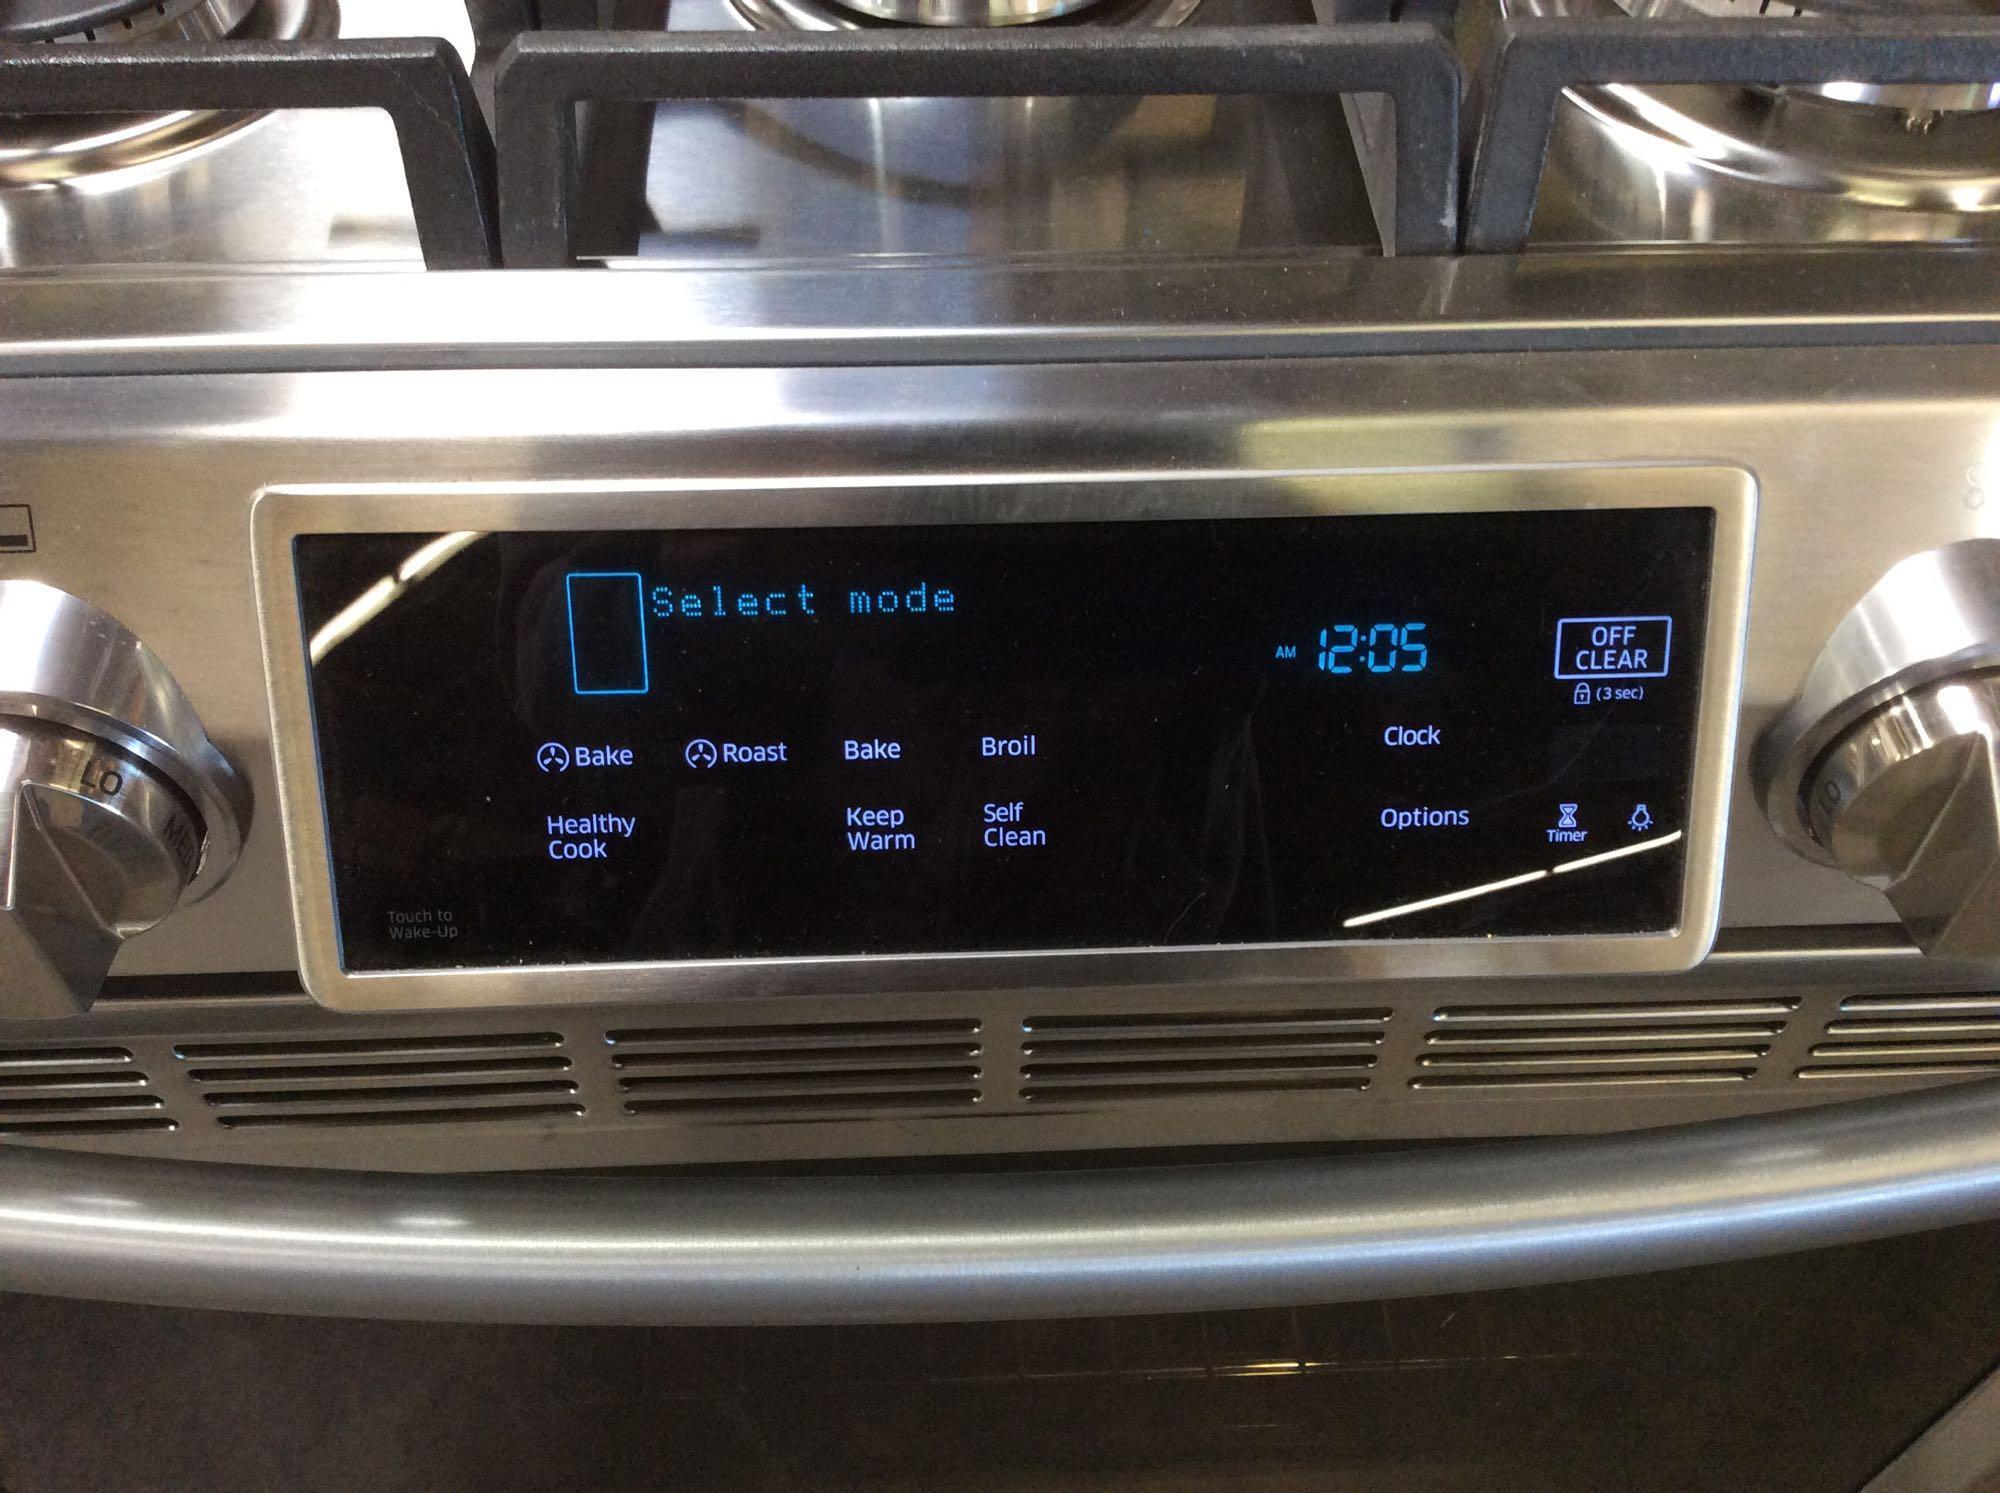 Samsung 5.8 cu. ft. Slide-In Gas Range with True Convection